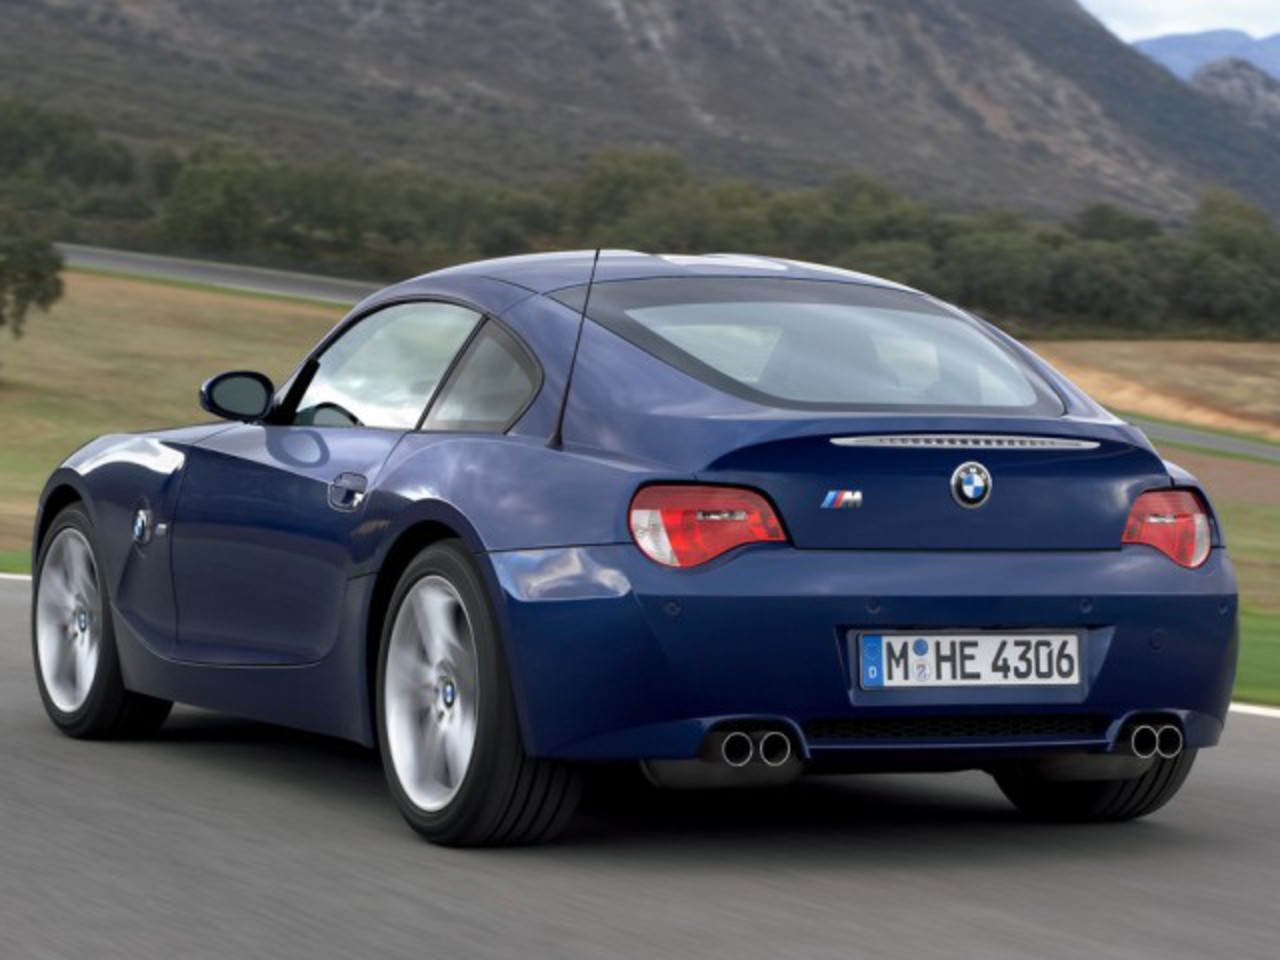 BMW Z4 M Coupe The BMW Z4 M Coupe is now bringing to life the Concept Car